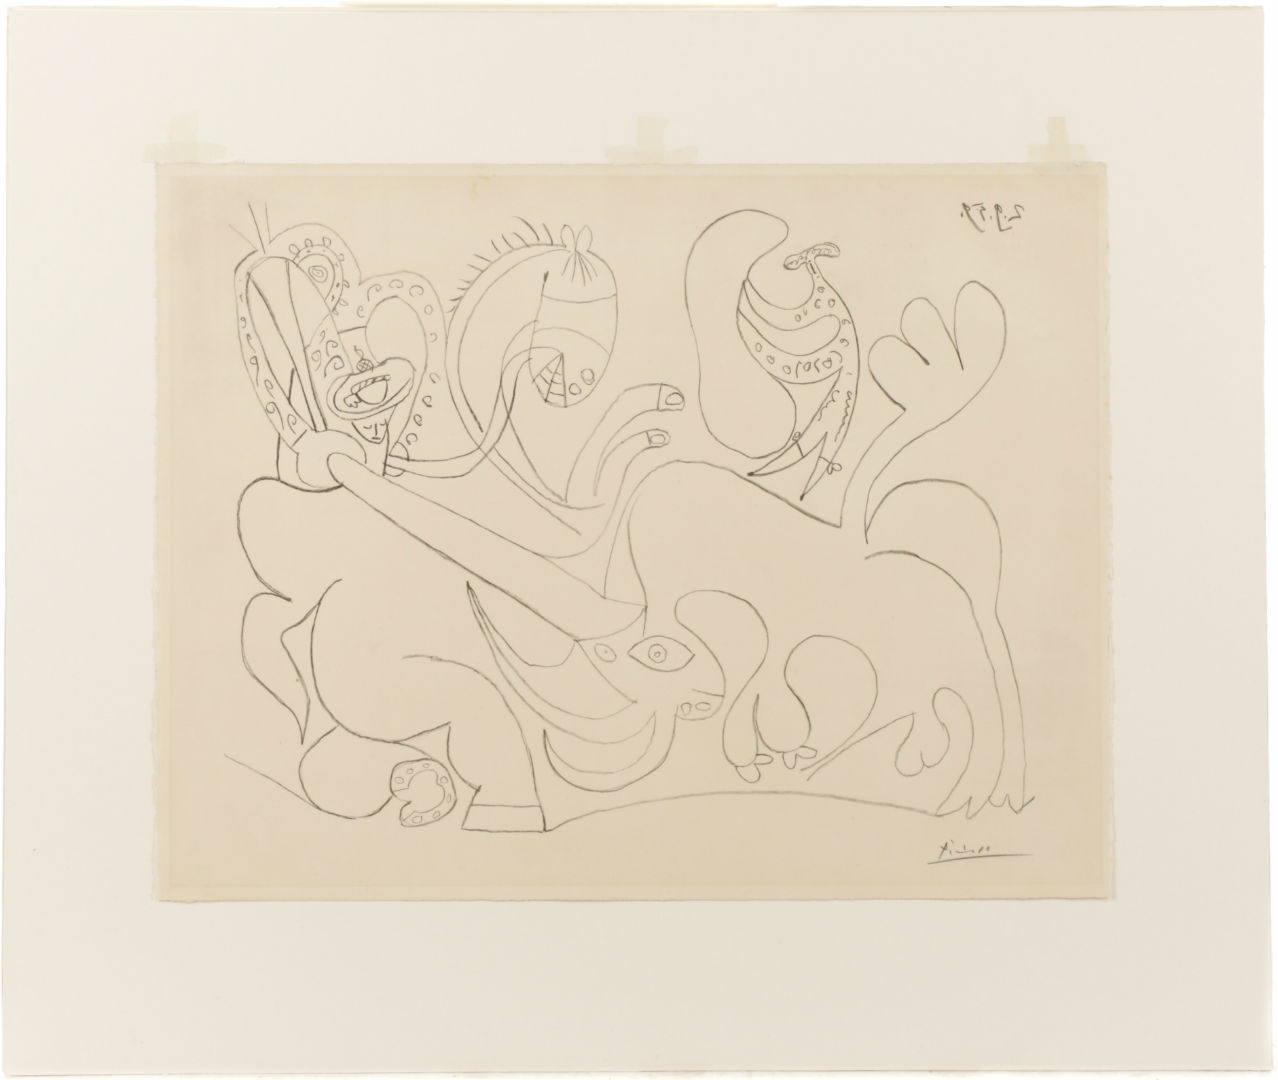 Hand-signed Marina Edition etching on paper with decked edges by Pablo Picasso, a print from circa 1959 titled ‘Man on Horseback,’ (est. $8,000-$12,000). Ahlers & Ogletree image